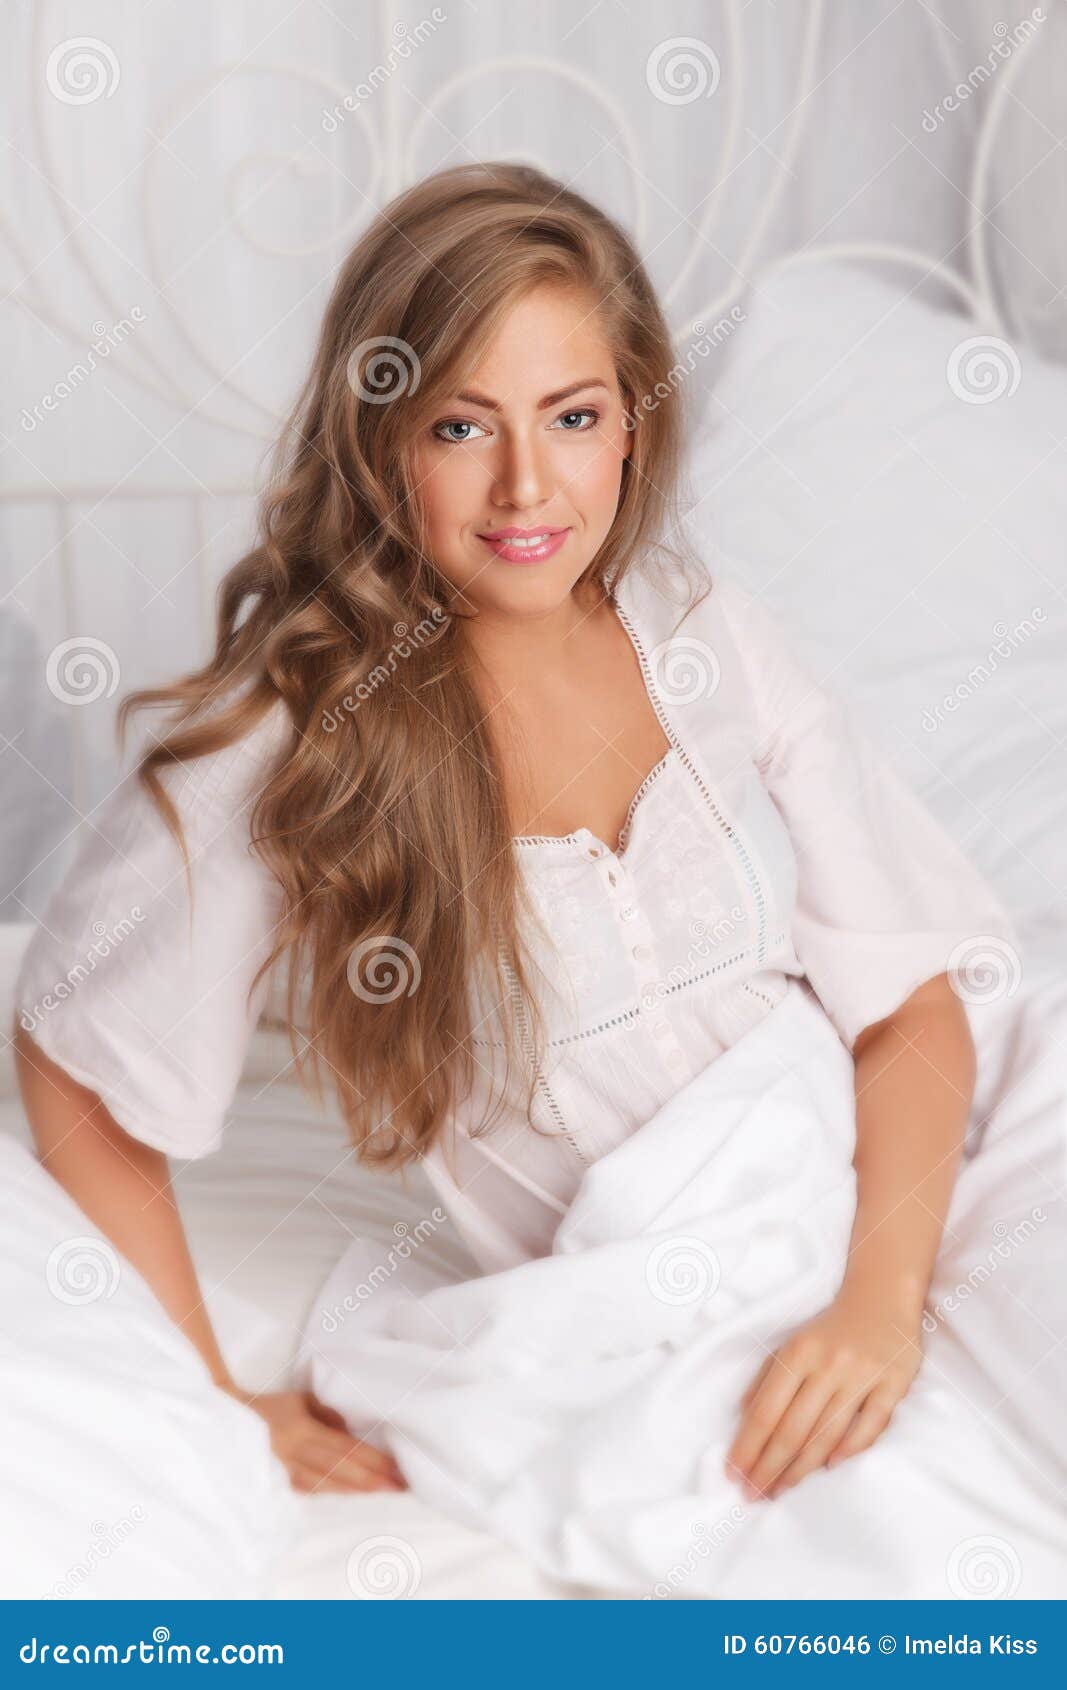 Pretty woman in the bed stock photo. Image of night, duvet - 60766046